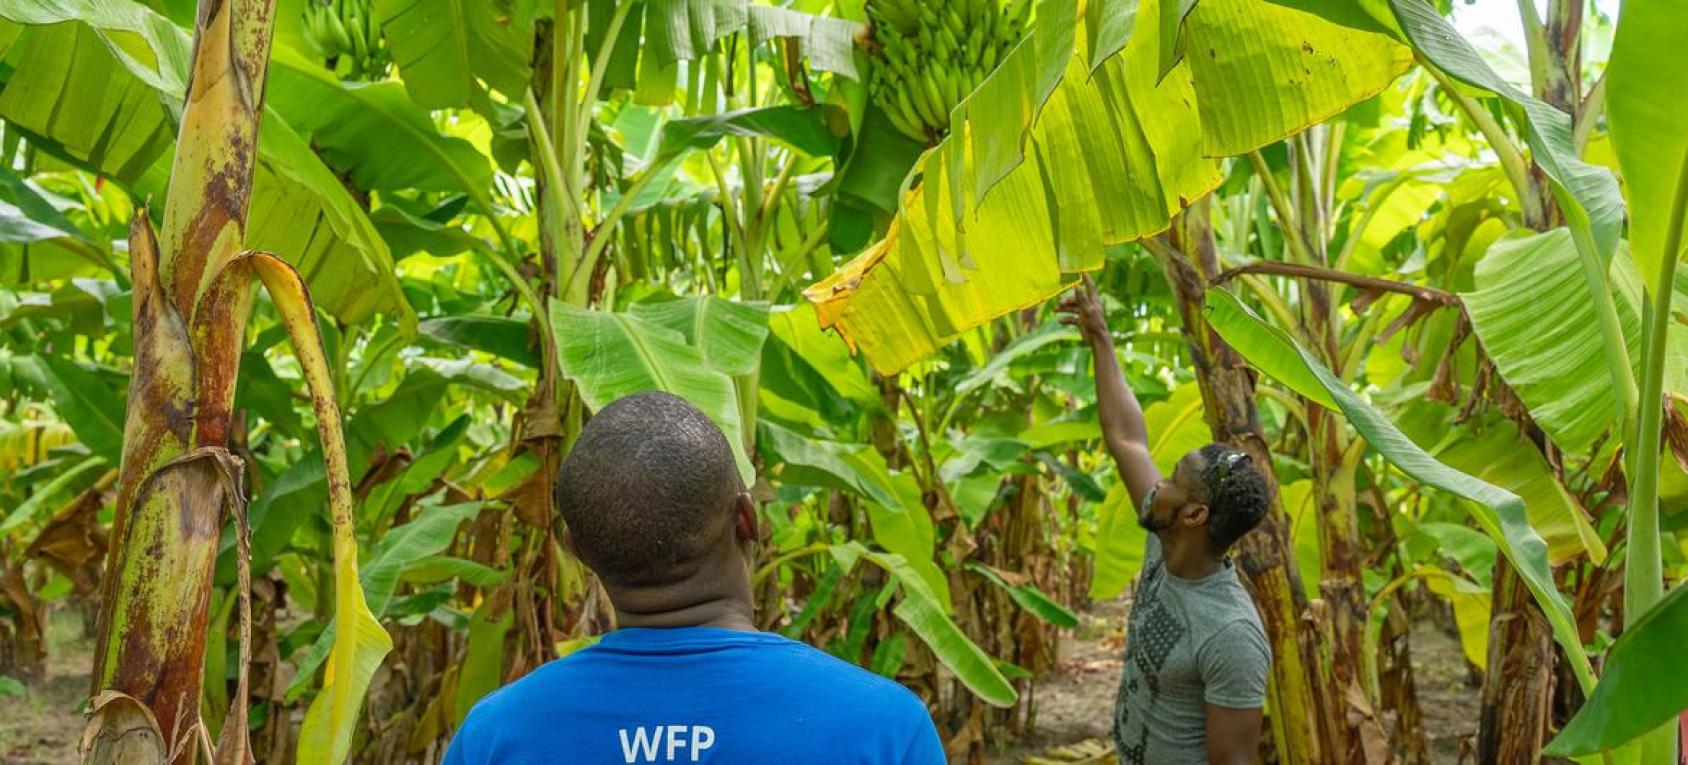 A man in a blue shirt with the WFP logo stands underneath green banana leaves and trees